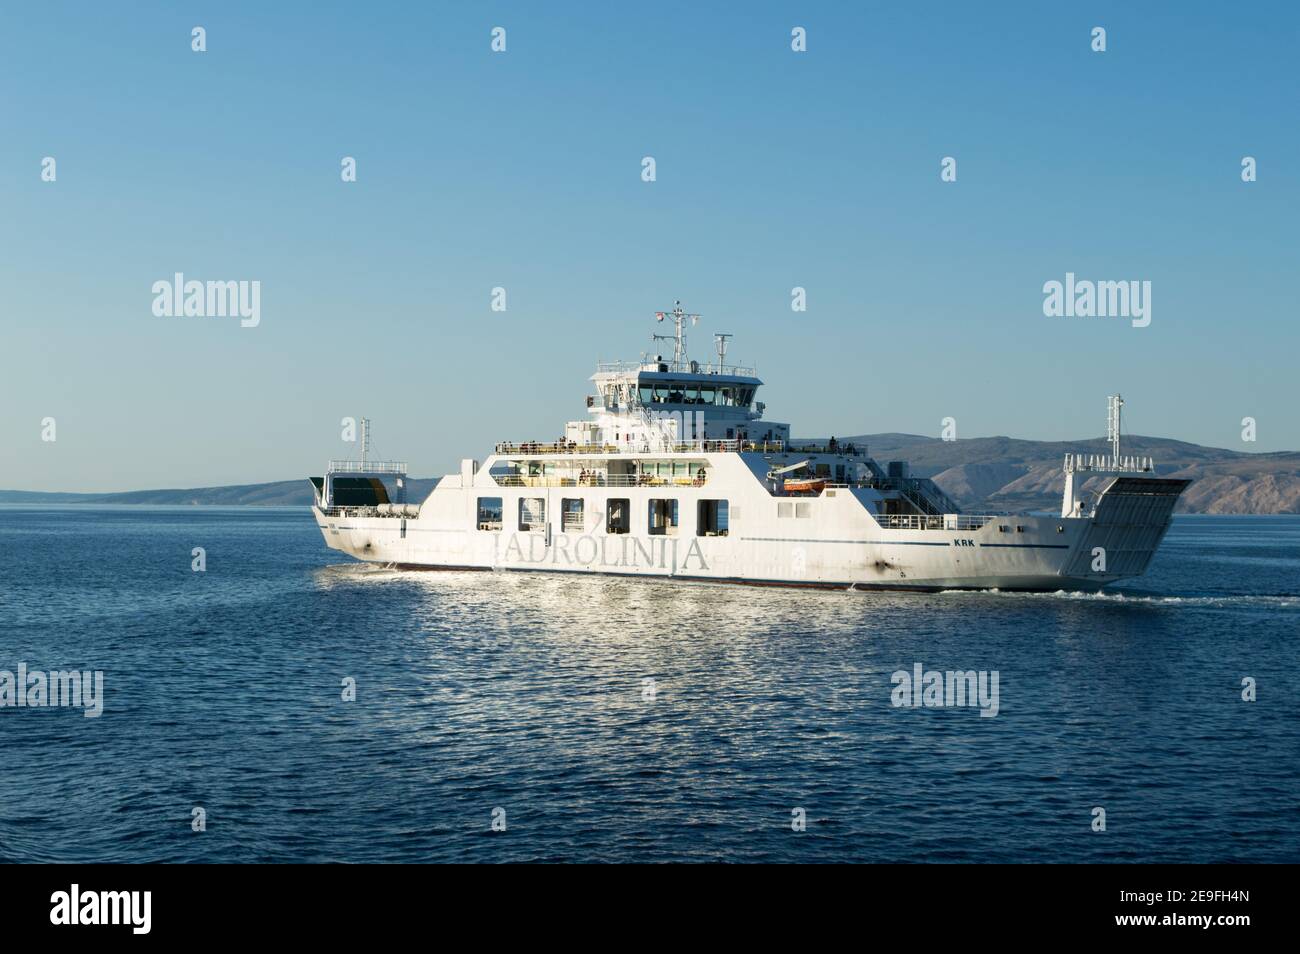 Croatia - September 2020: Passenger and car ferry ship connecting Croatian islands Krk and Cres, owned by Jadrolinija, Croatian shipping company Stock Photo